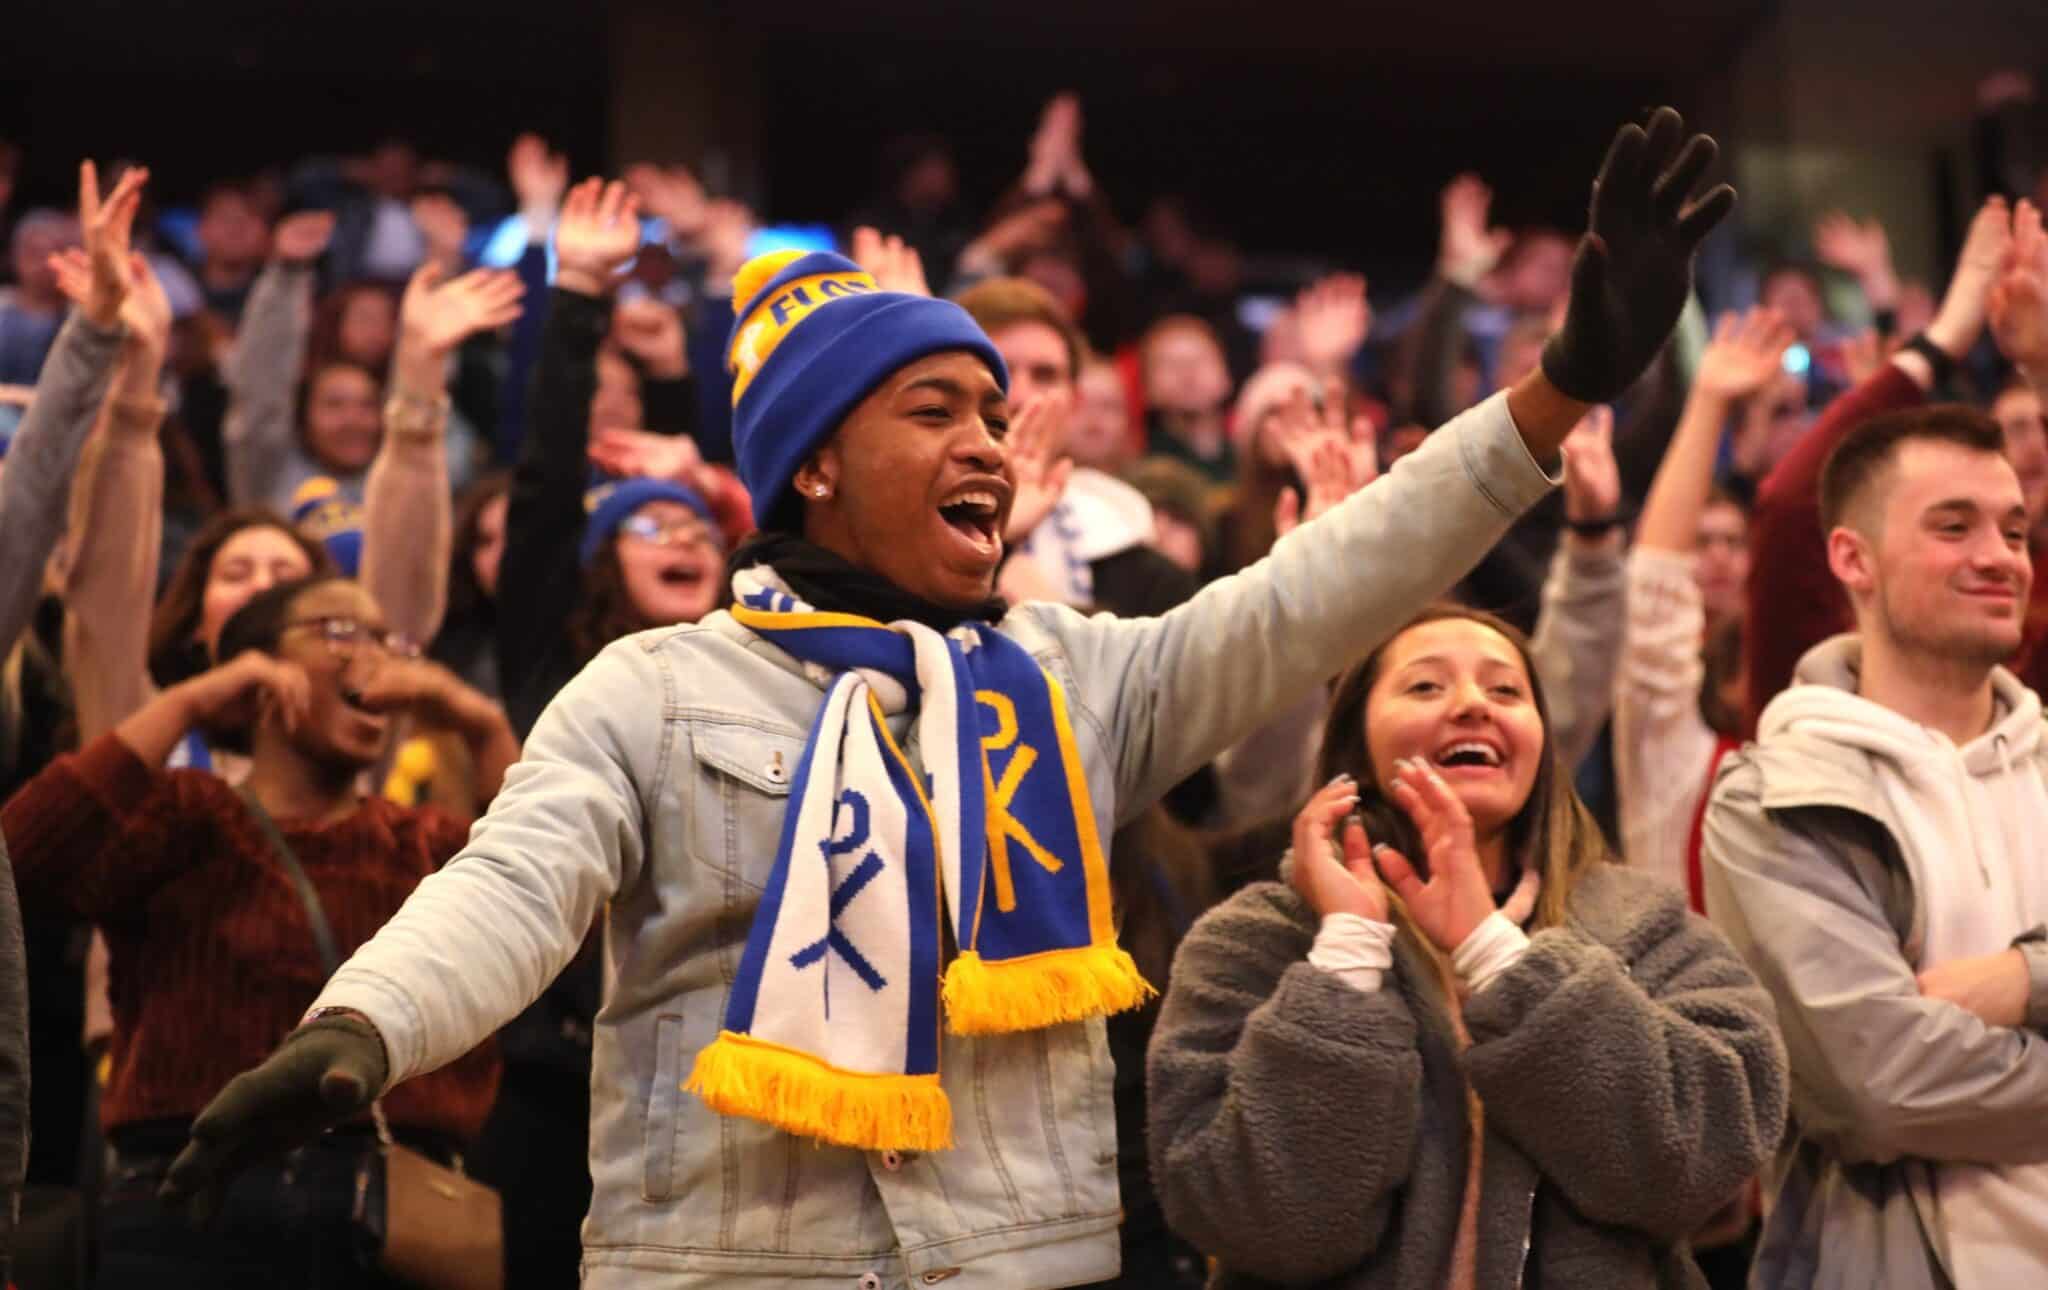 Young people cheer during the annual Youth Rally for Life sponsored by the Archdiocese of Washington Jan. 24, 2020, at the Capital One Arena. The rally was followed by Mass celebrated at the arena by then-Archbishop Wilton D. Gregory of Washington. On Jan. 20, 2023, now-Cardinal Gregory will celebrate the Youth Mass of Celebration and Thanksgiving at the Cathedral of St. Matthew the Apostle. (CNS photo/Andrew Rozario, Catholic Standard)